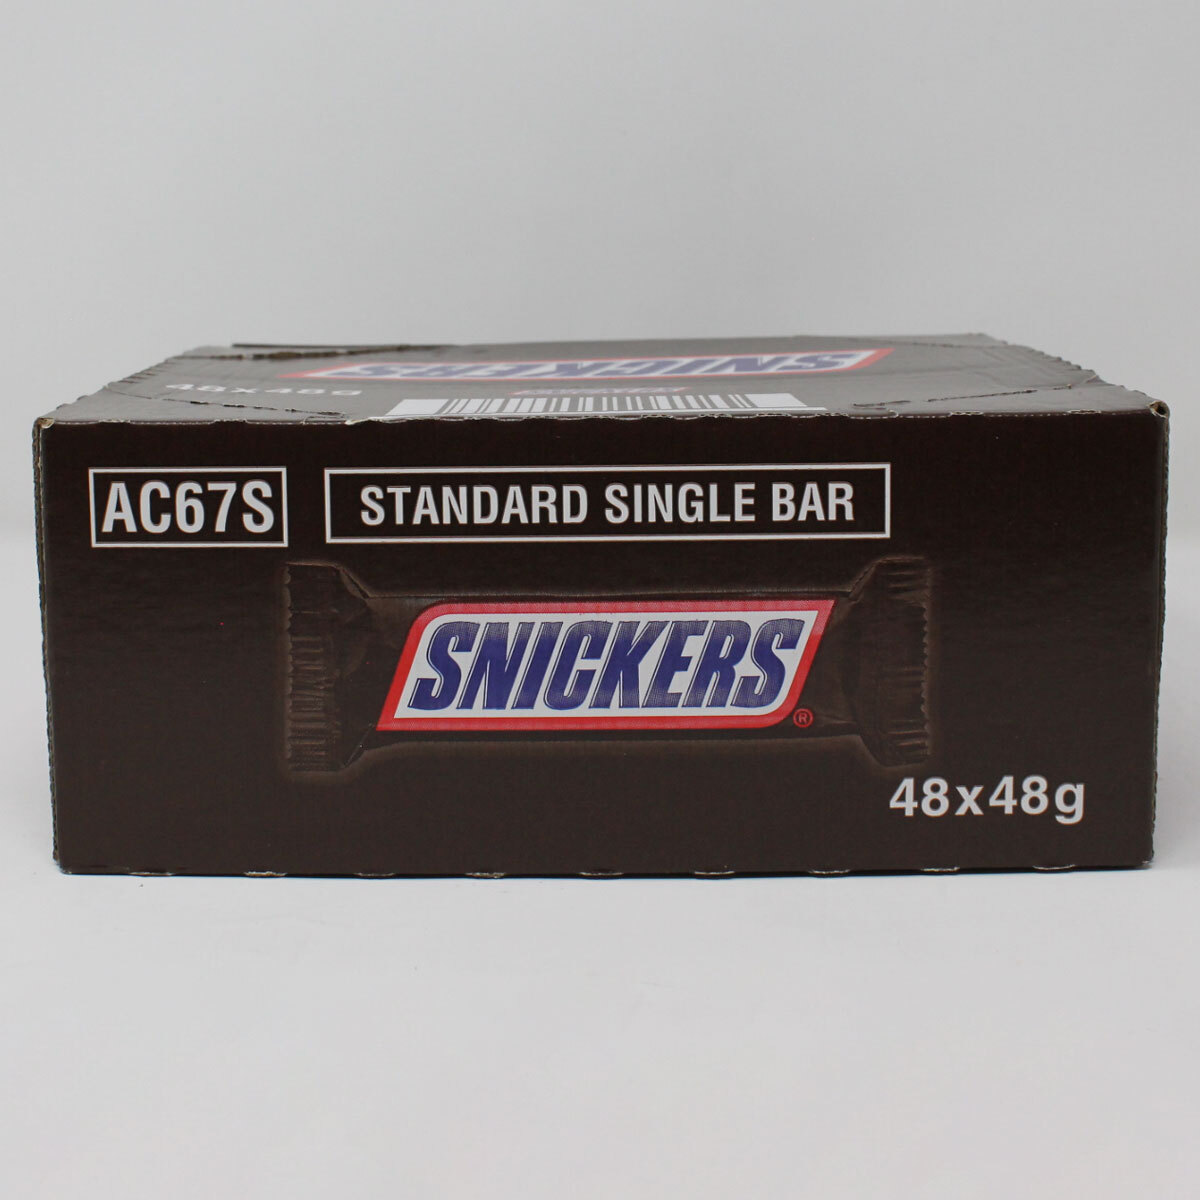 Snickers Bars, 48 x 48g Side of Box